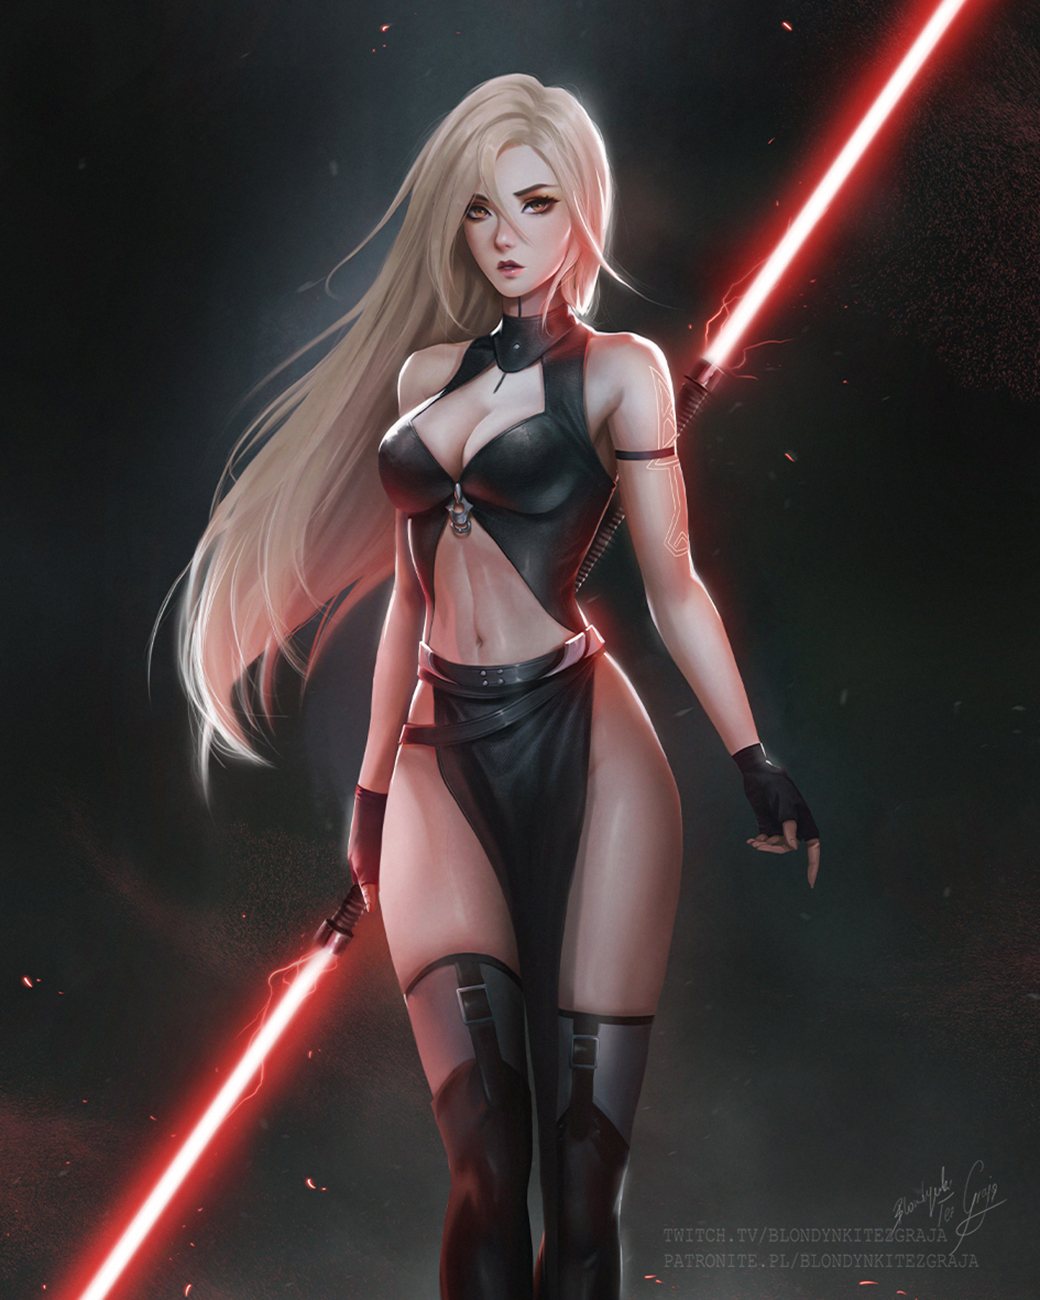 General 1040x1300 Blondynki Tez Graja drawing Star Wars women Sith blonde long hair straight hair wind looking at viewer bodysuit cleavage belly laser laser swords lightsaber gloves thigh-highs